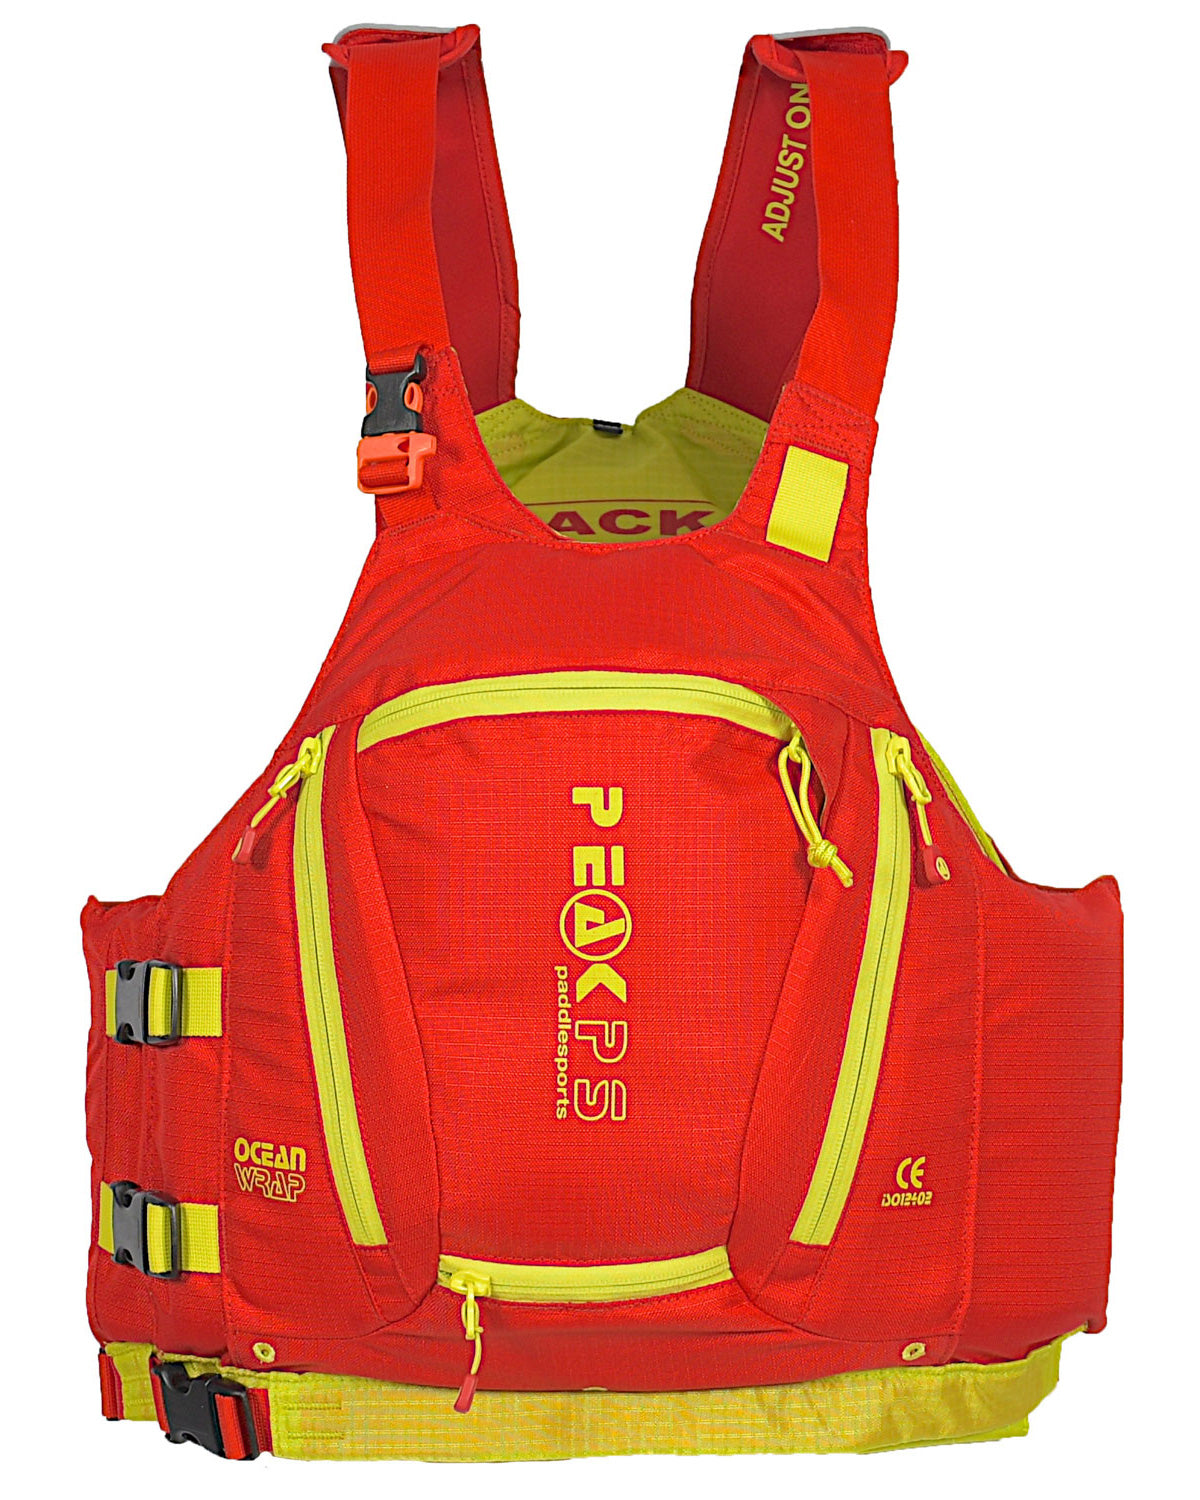 A red Peak Paddlesport's Ocean Wrap buoyancy aid with lime zips 